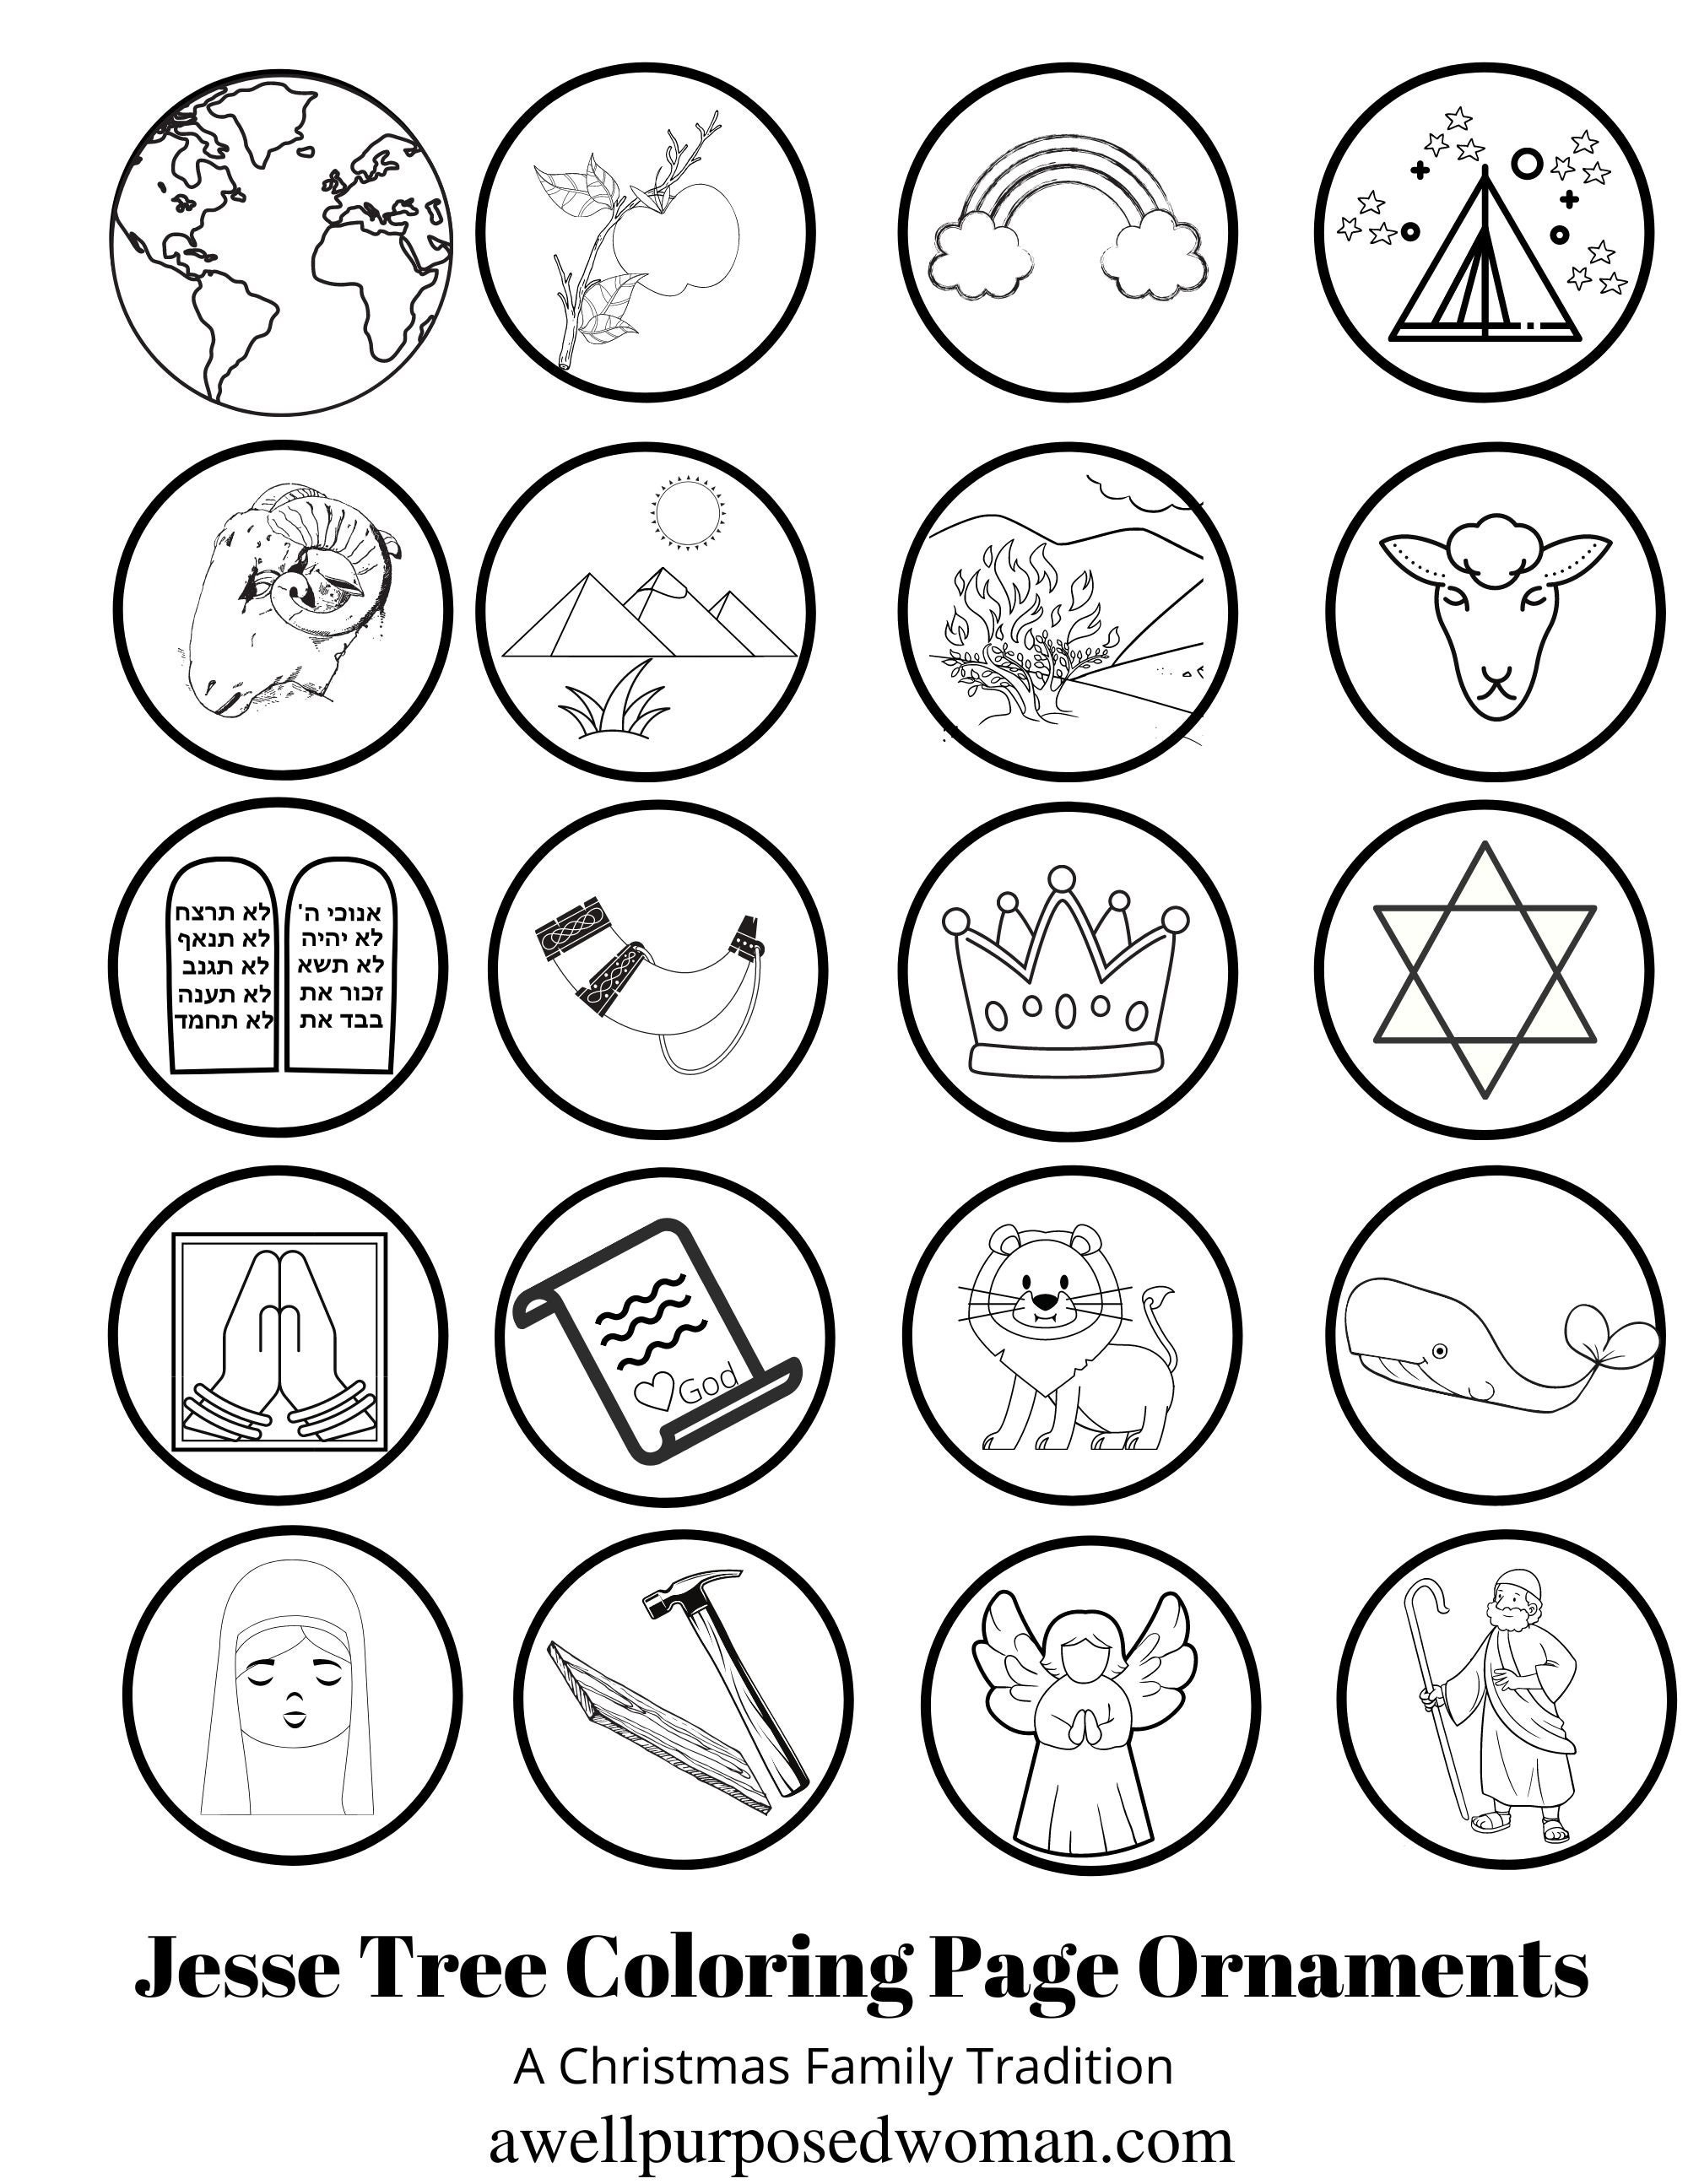 Jesse Tree Coloring Pages